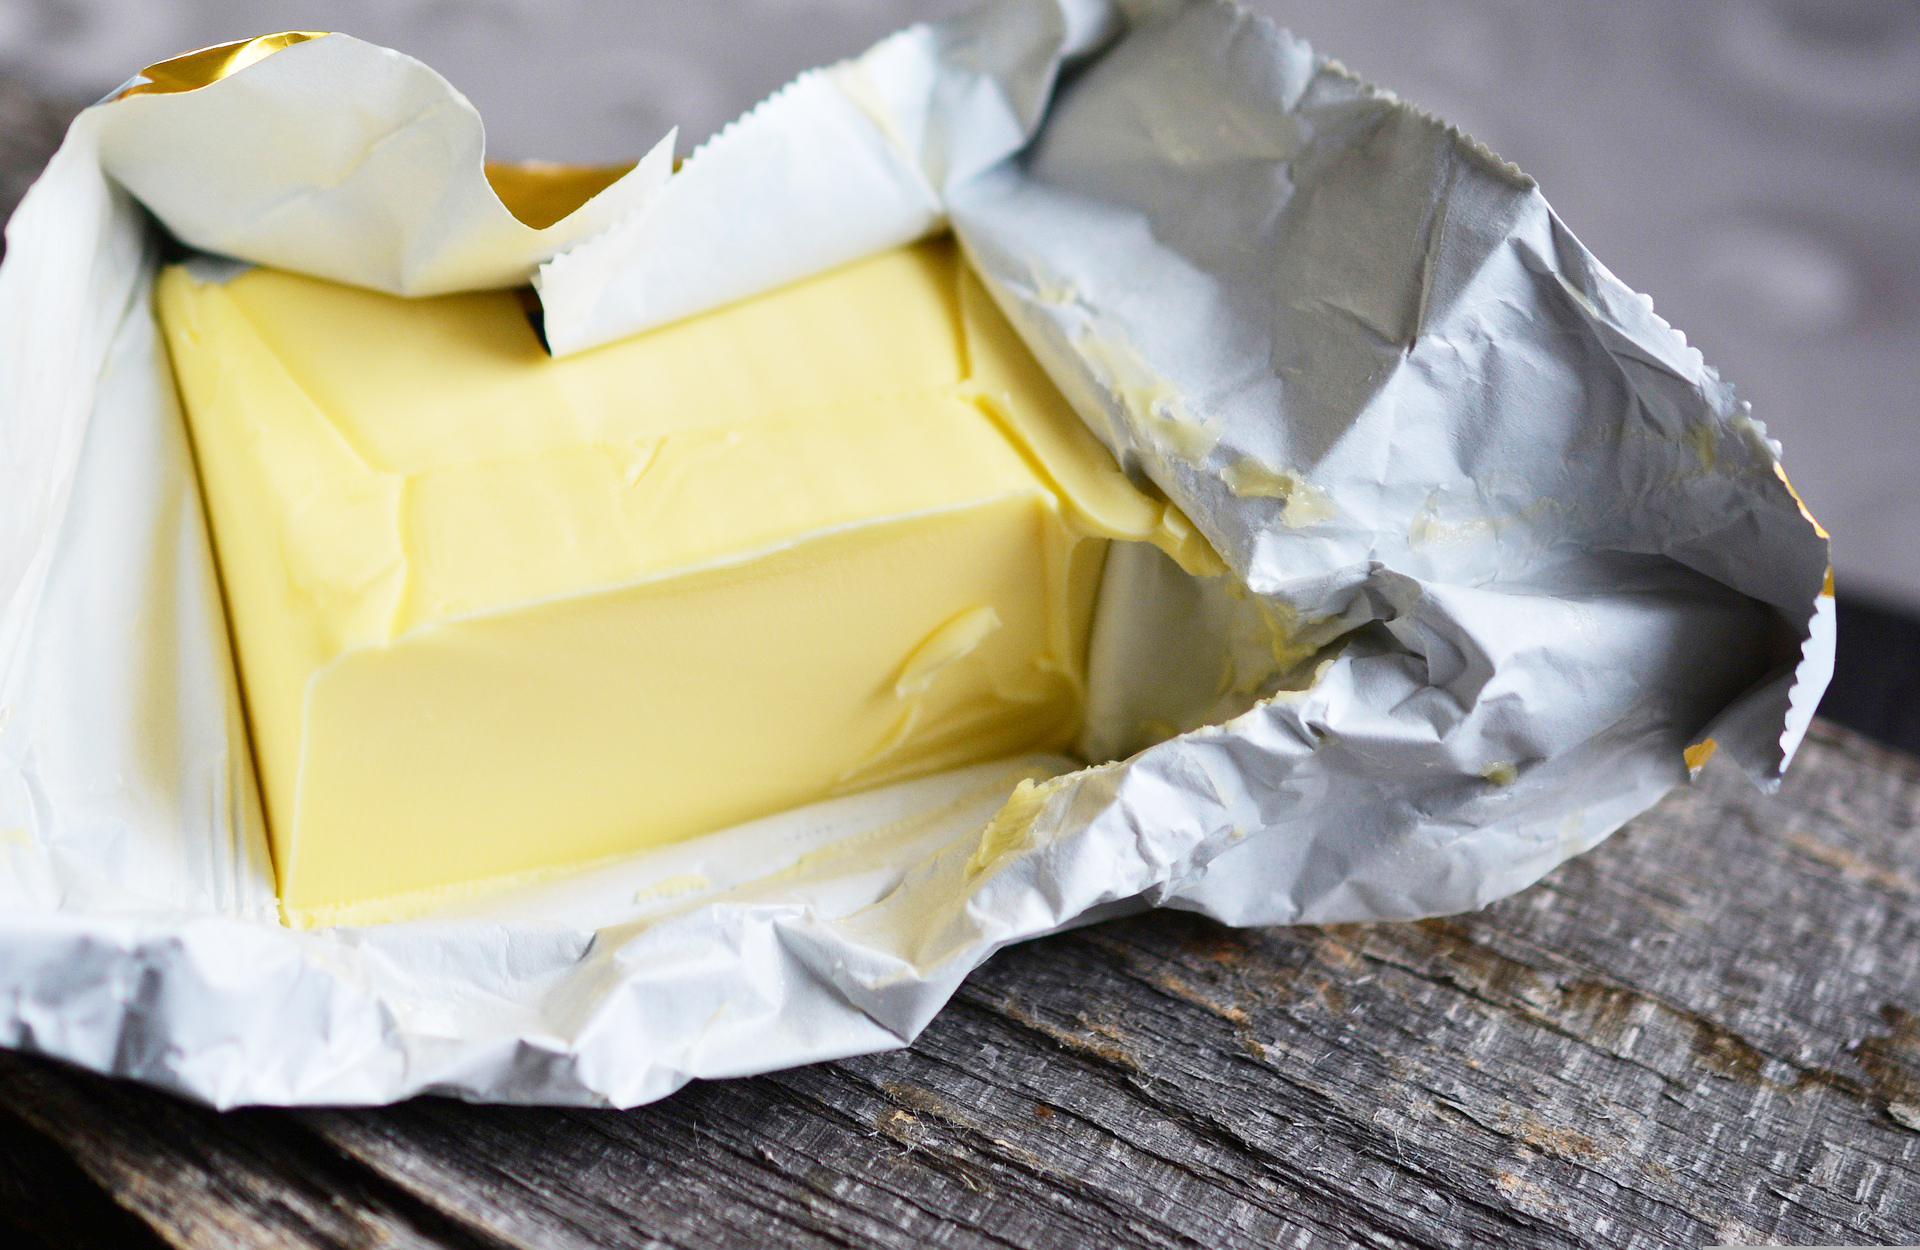 You Probably Never Thought To Grate Your Butter